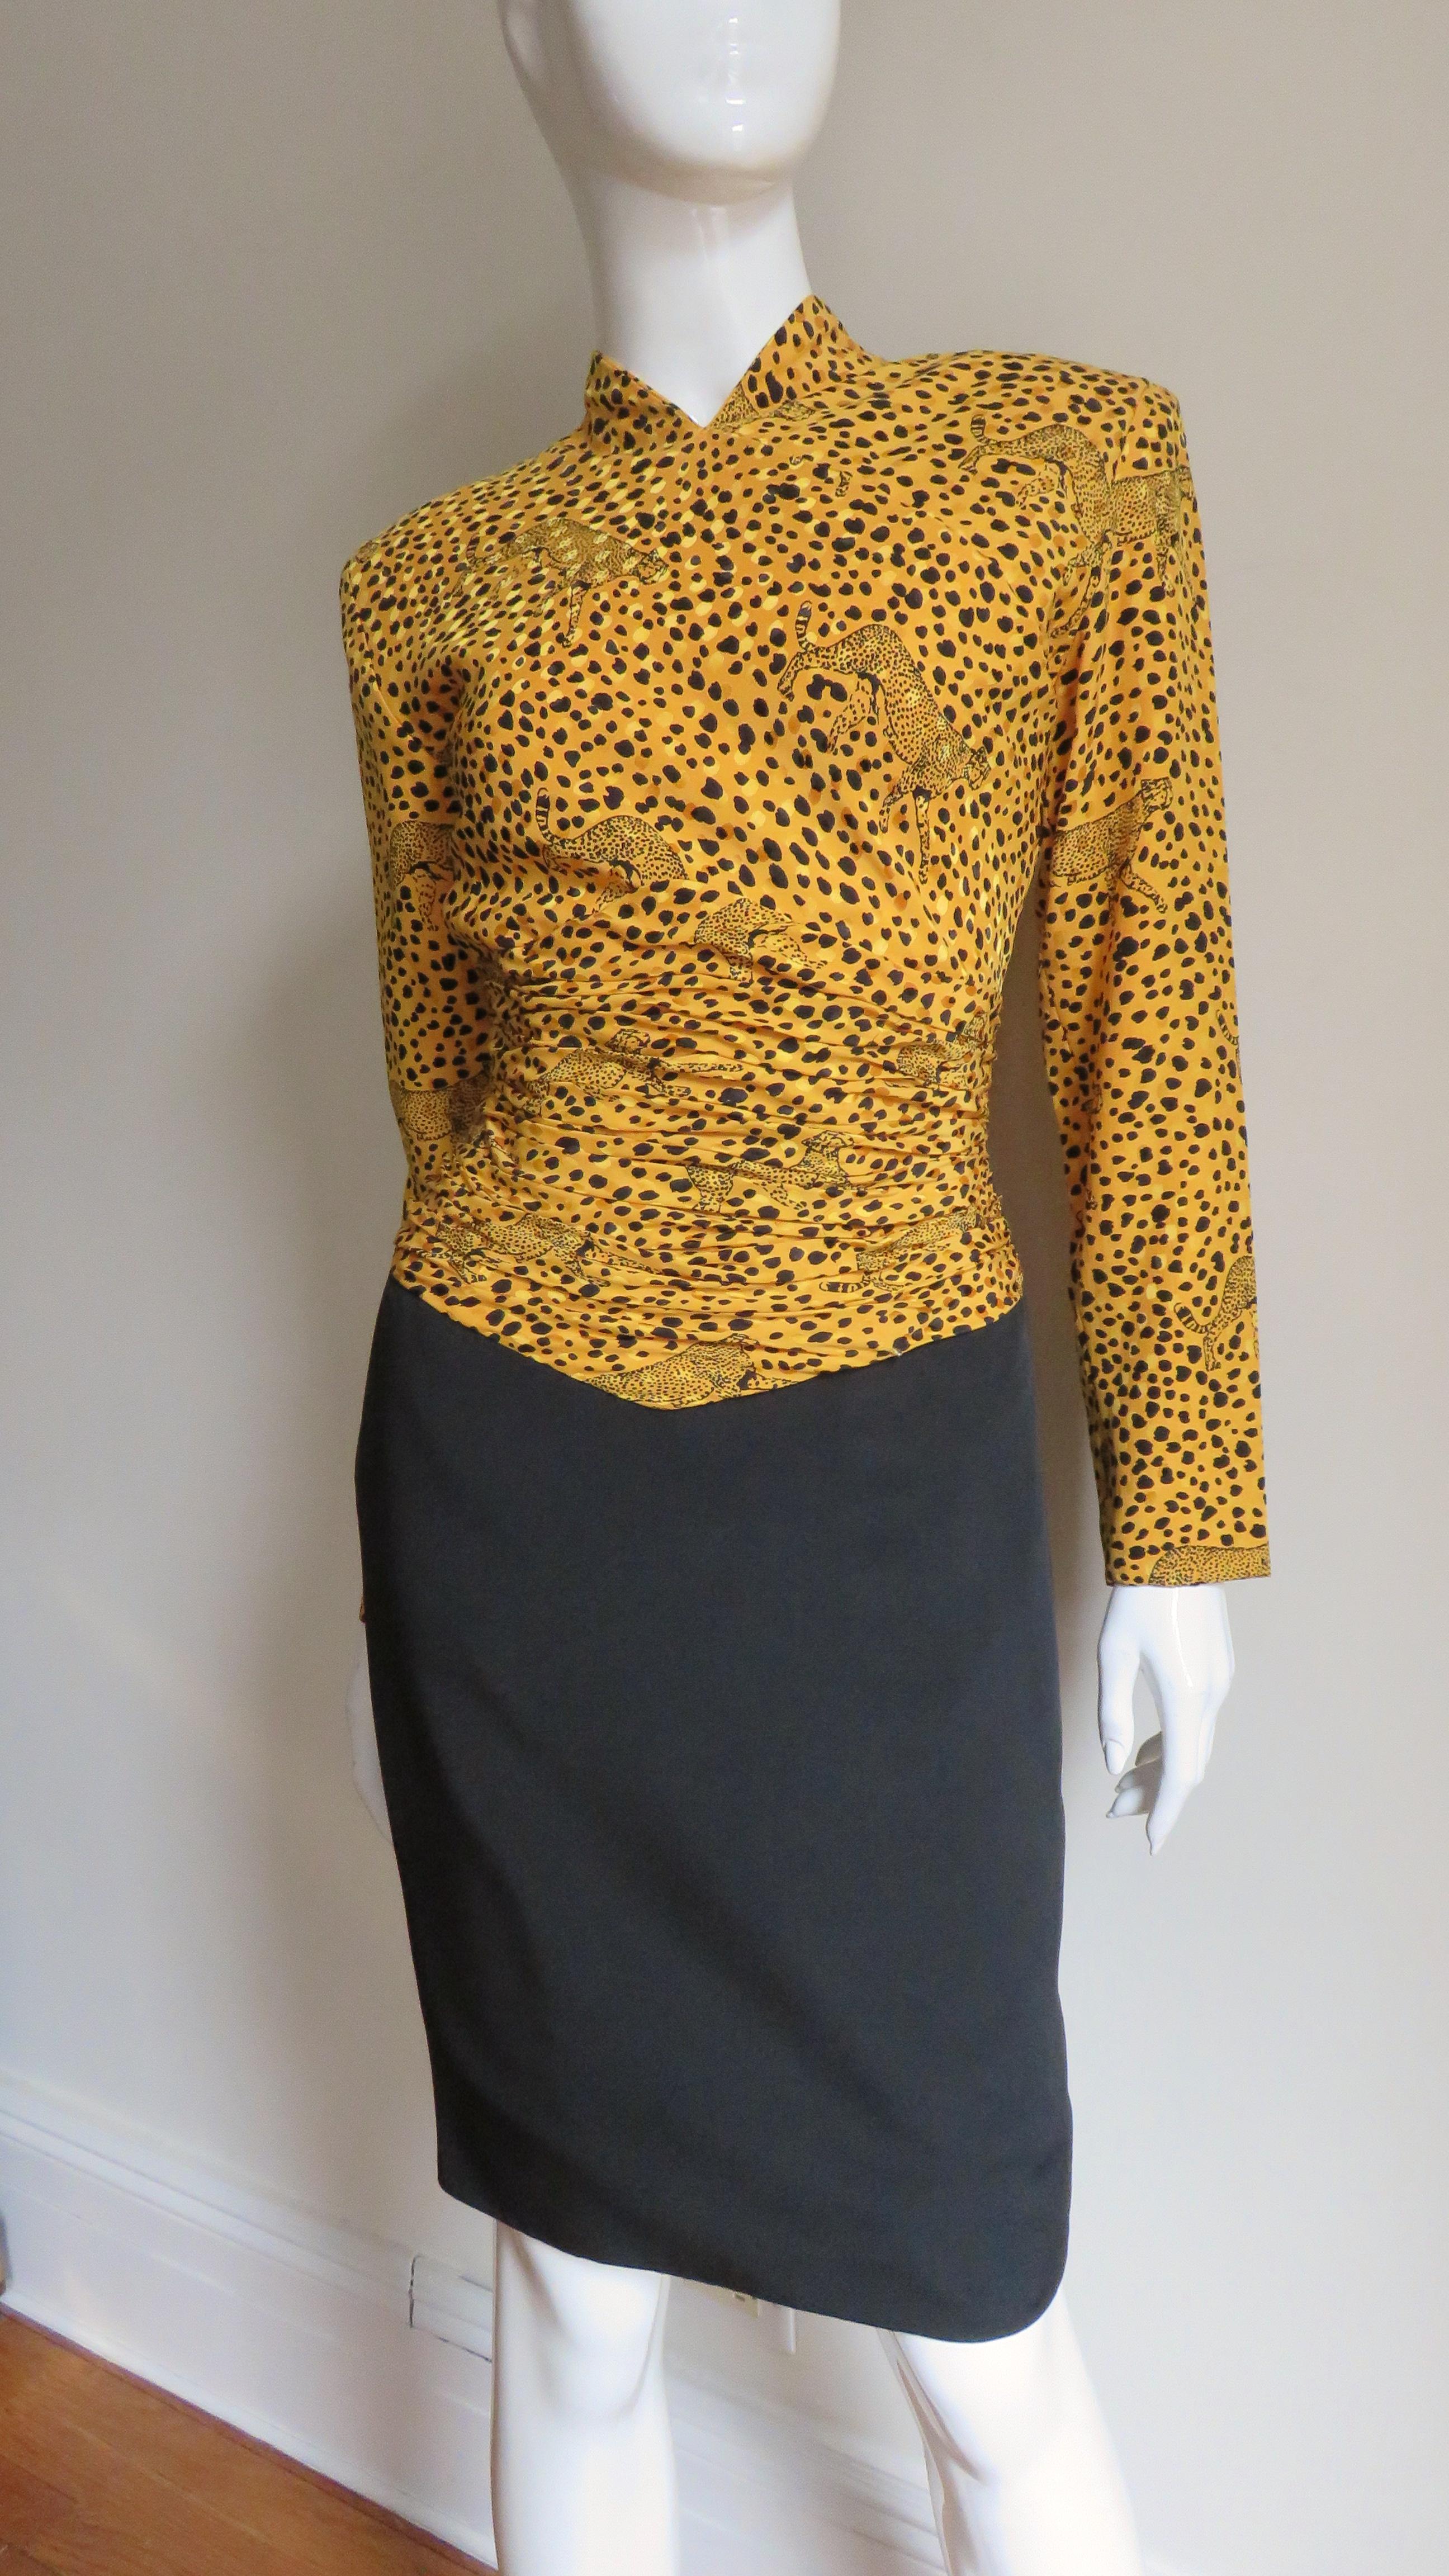 A great silk dress from Vicky Tiel Couture with a marigold bodice printed with leopards and a solid black skirt portion. The bodice has a small stand up collar, long sleeves, and horizontal ruching around the waist. The skirt portion is straight and